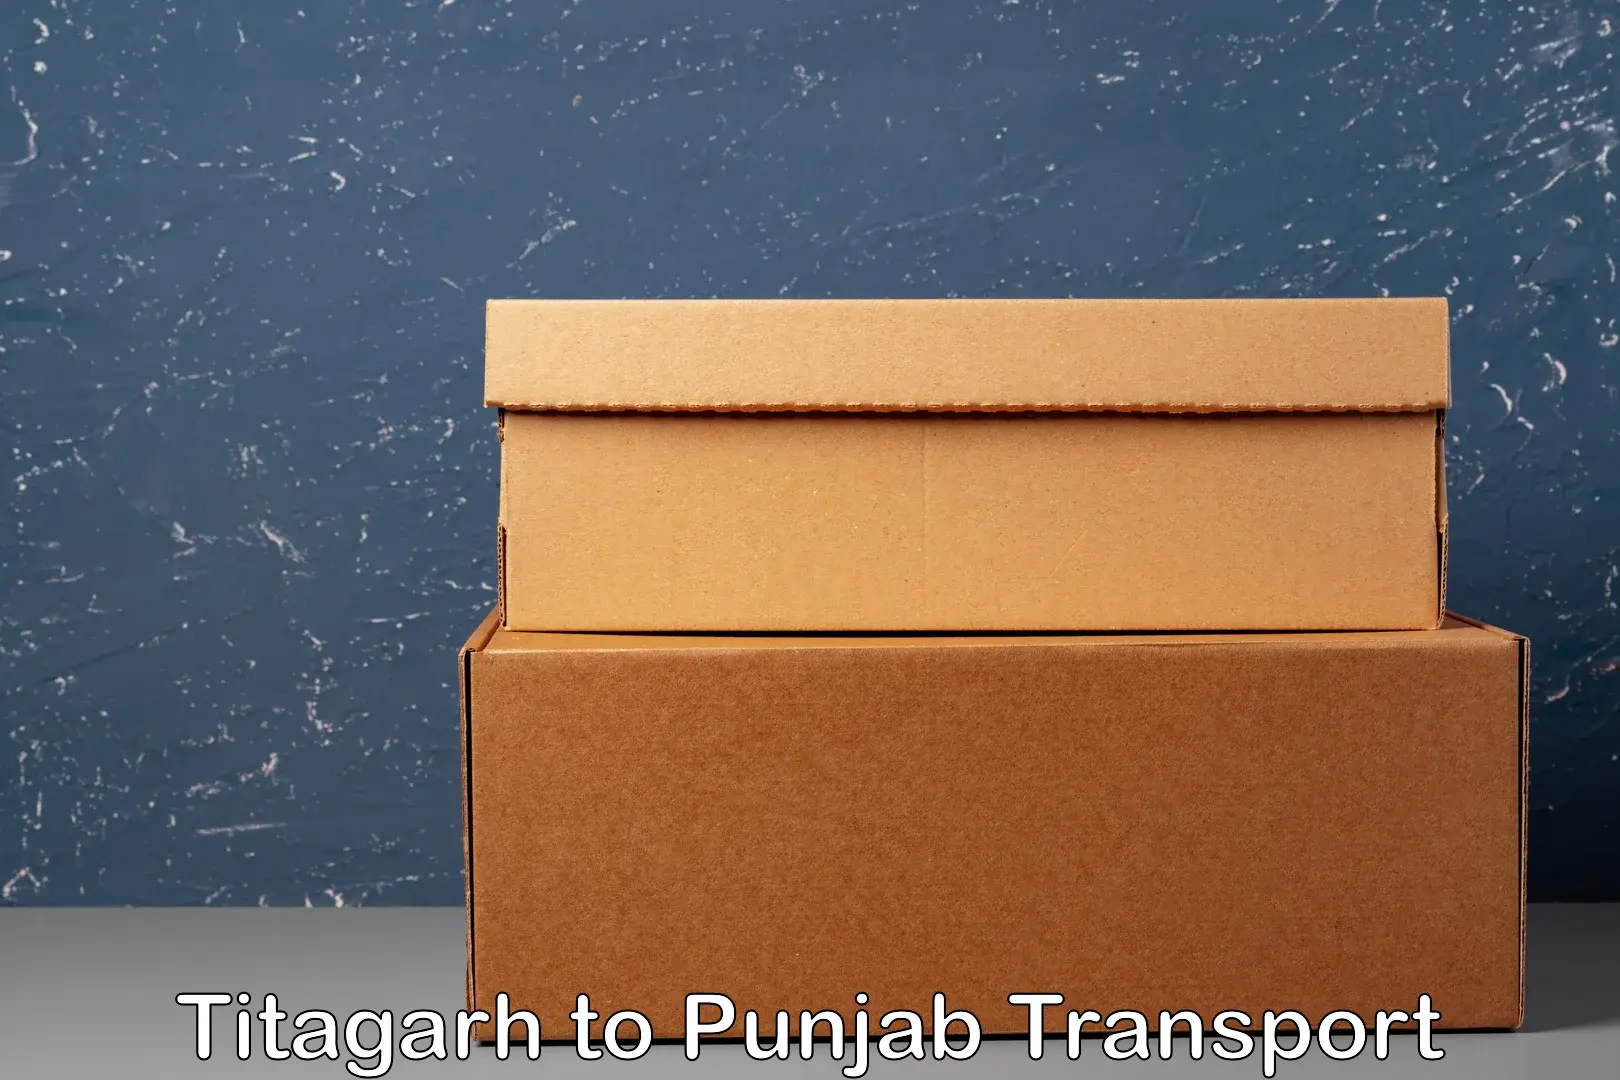 Nearby transport service Titagarh to IIT Ropar